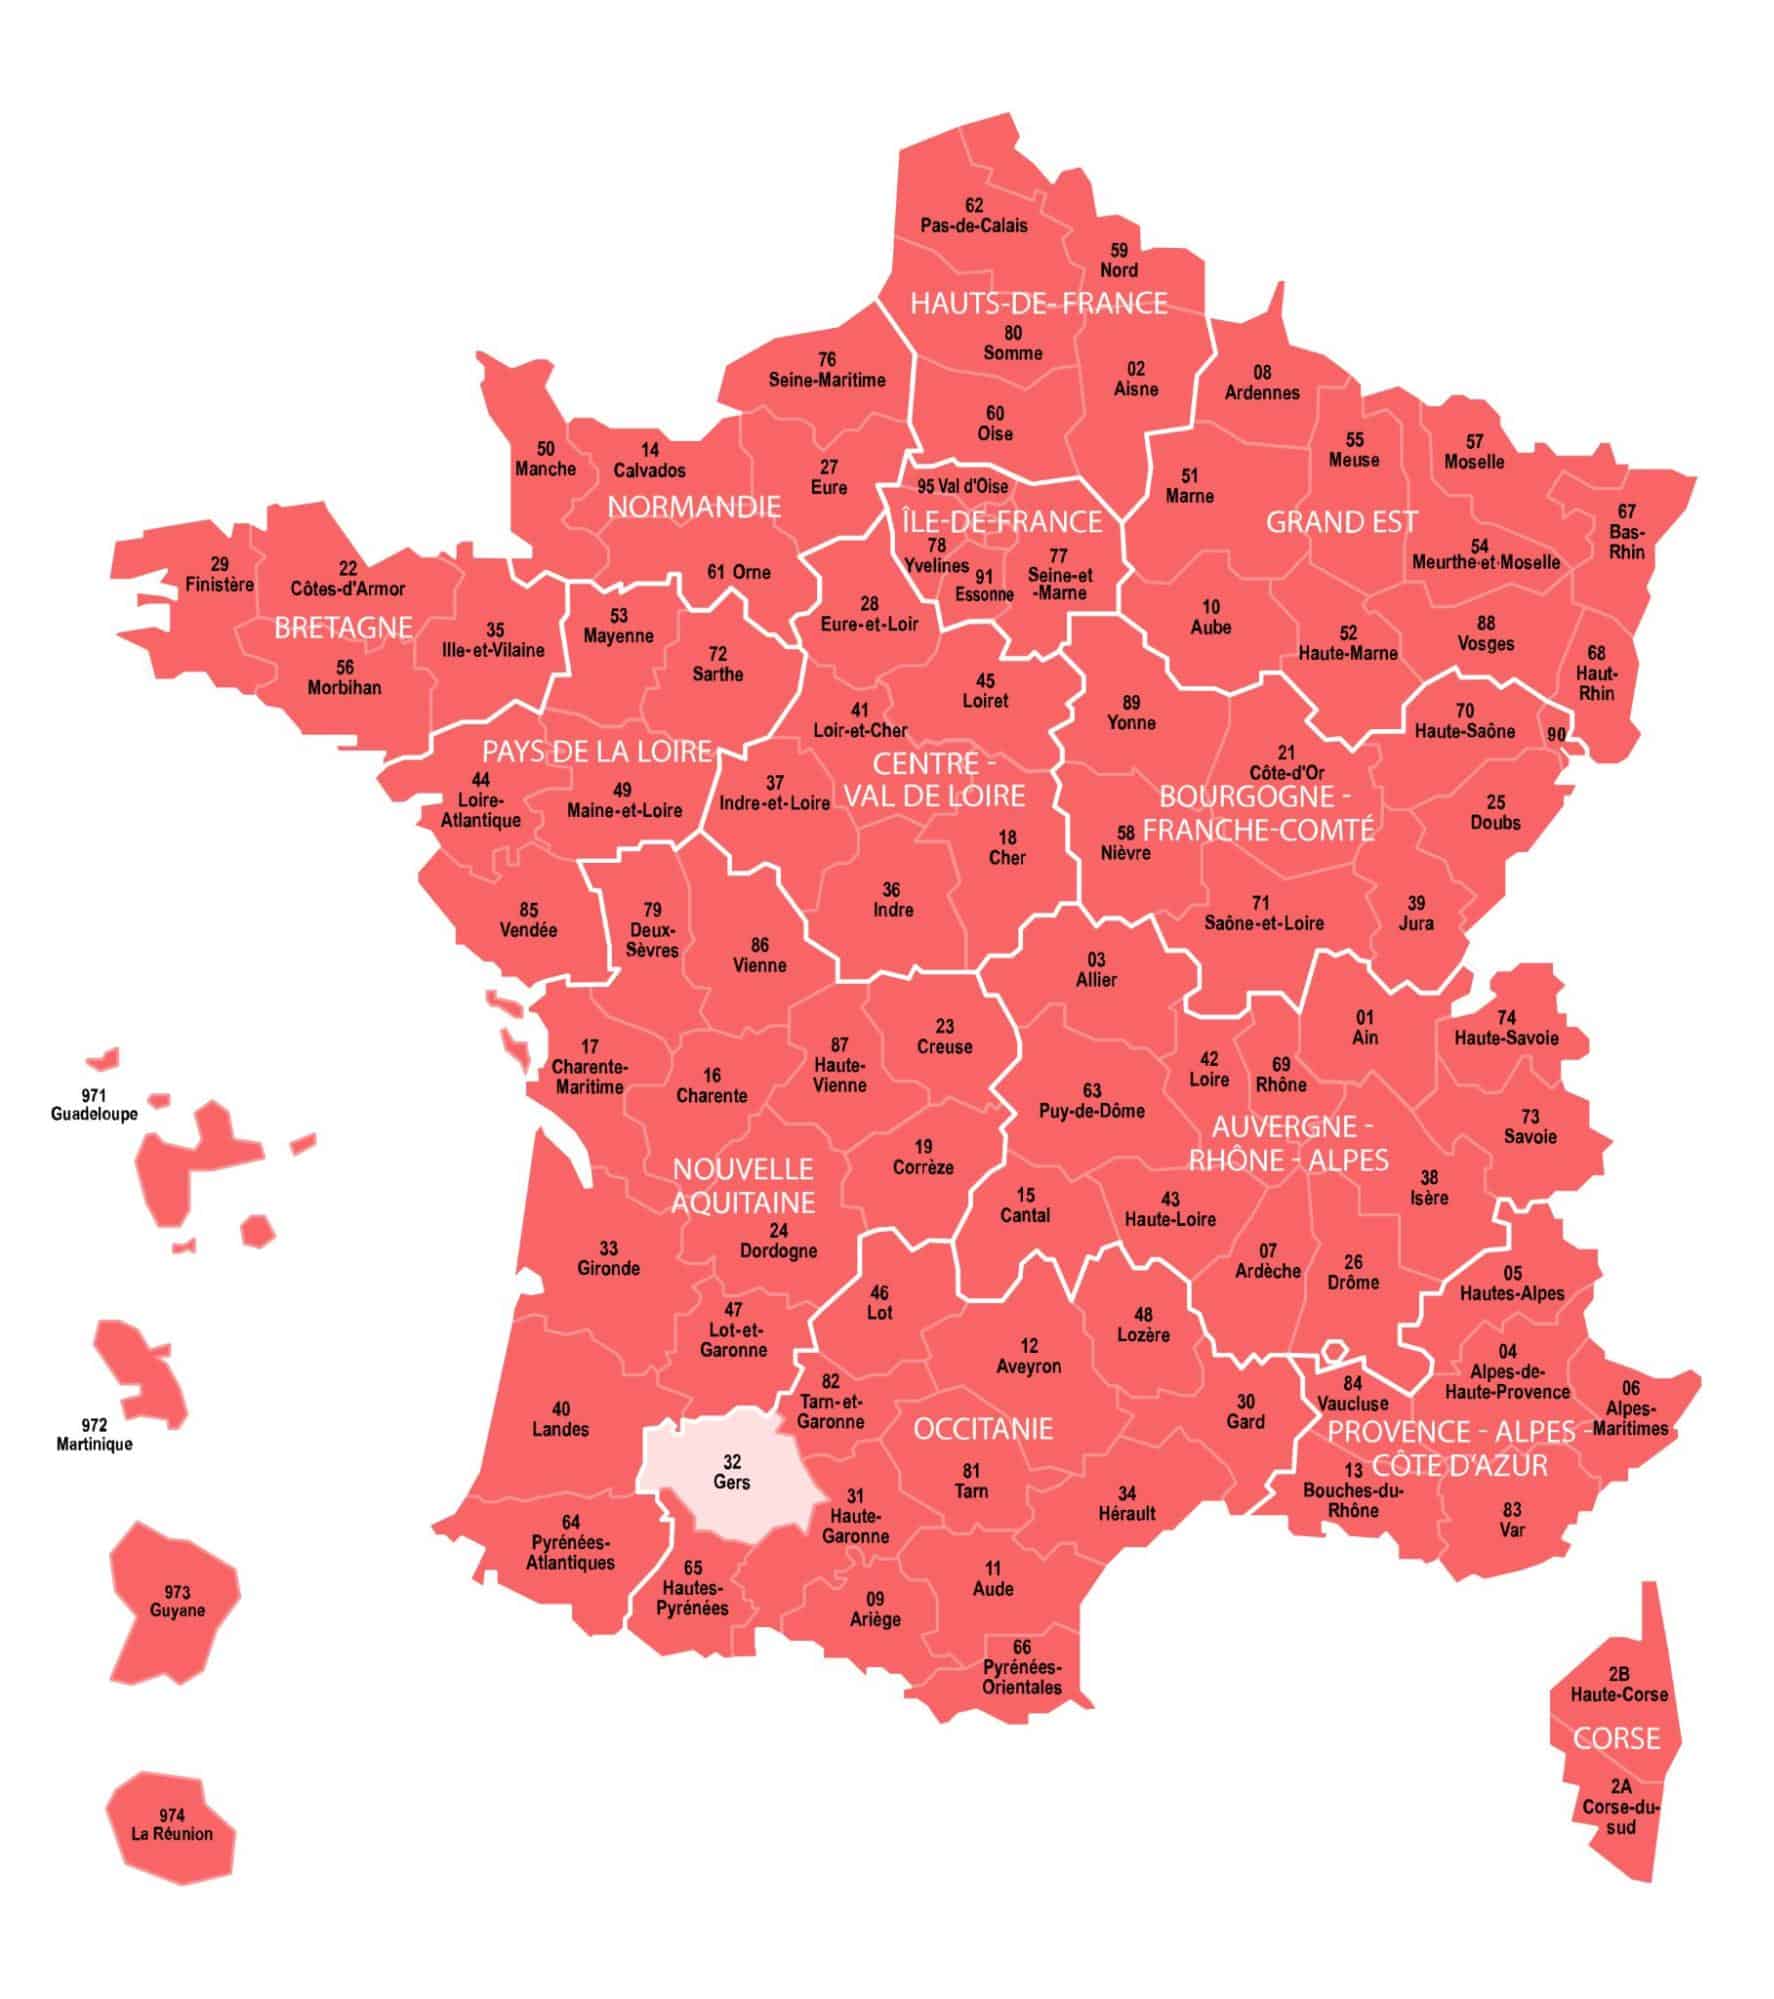 The departments in dark pink show the geographic coverage of civil birth, marriage, and death records in the MyHeritage French collections